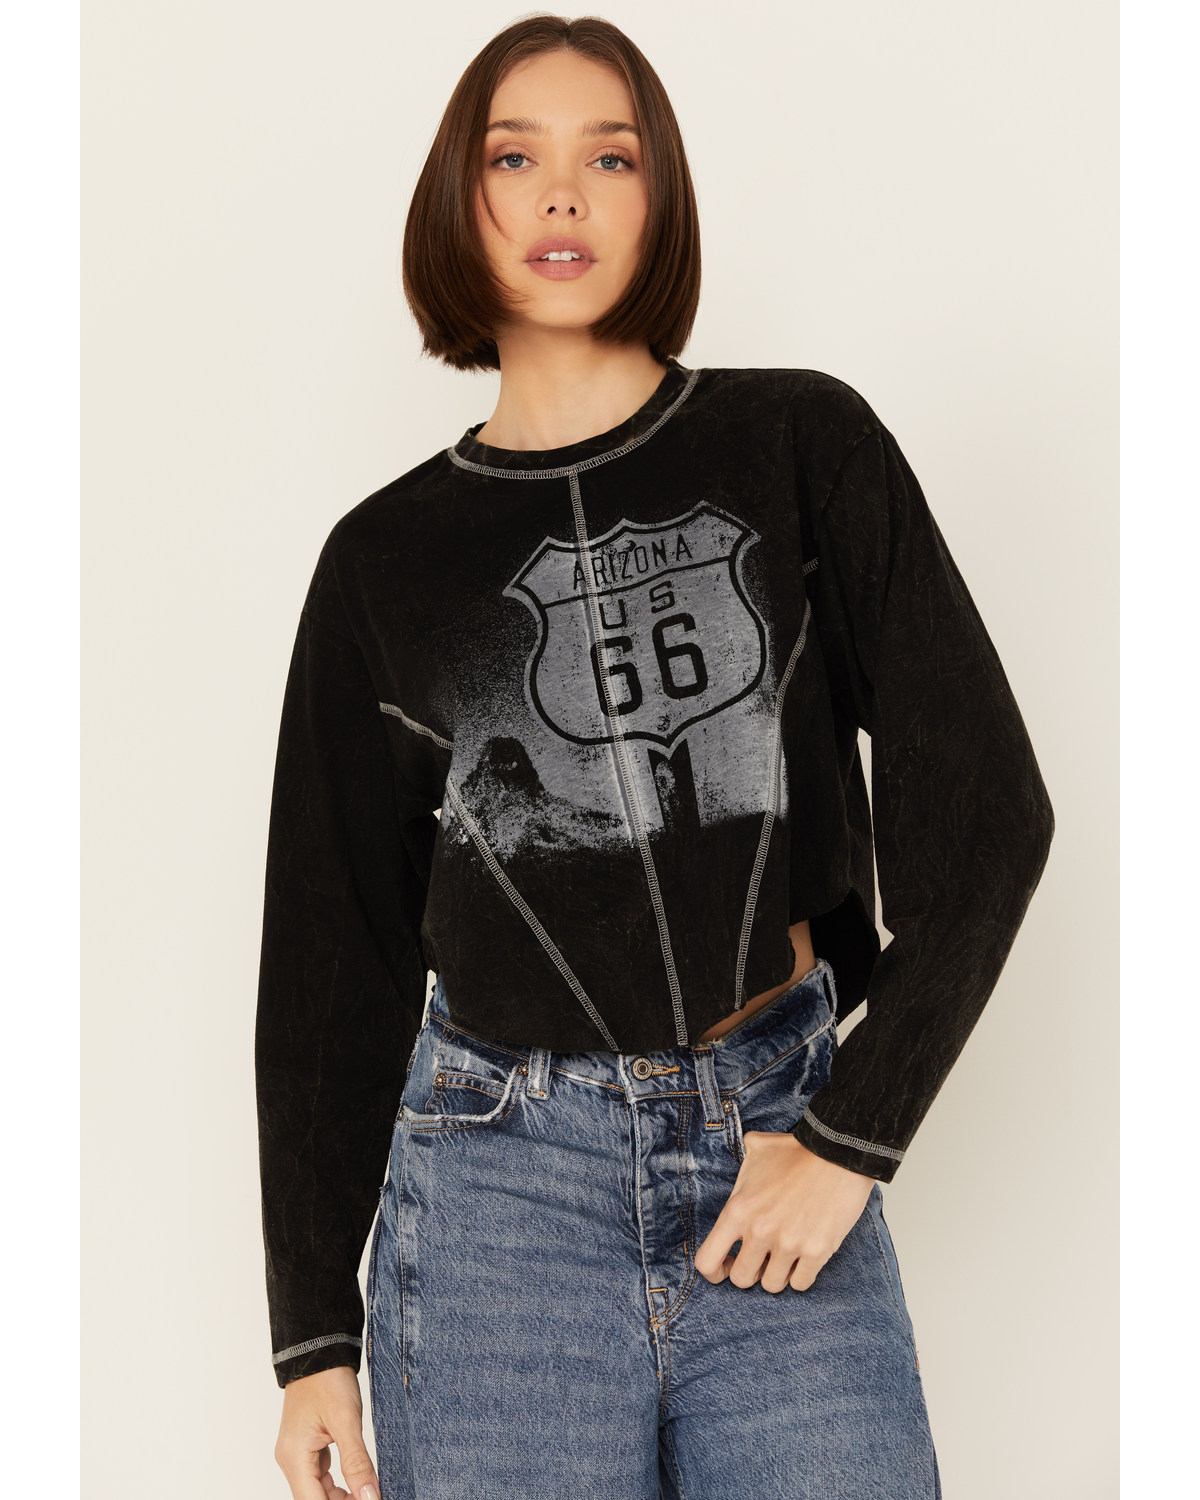 Youth Revolt Women's Route 66 Seamed Long Sleeve Graphic Tee